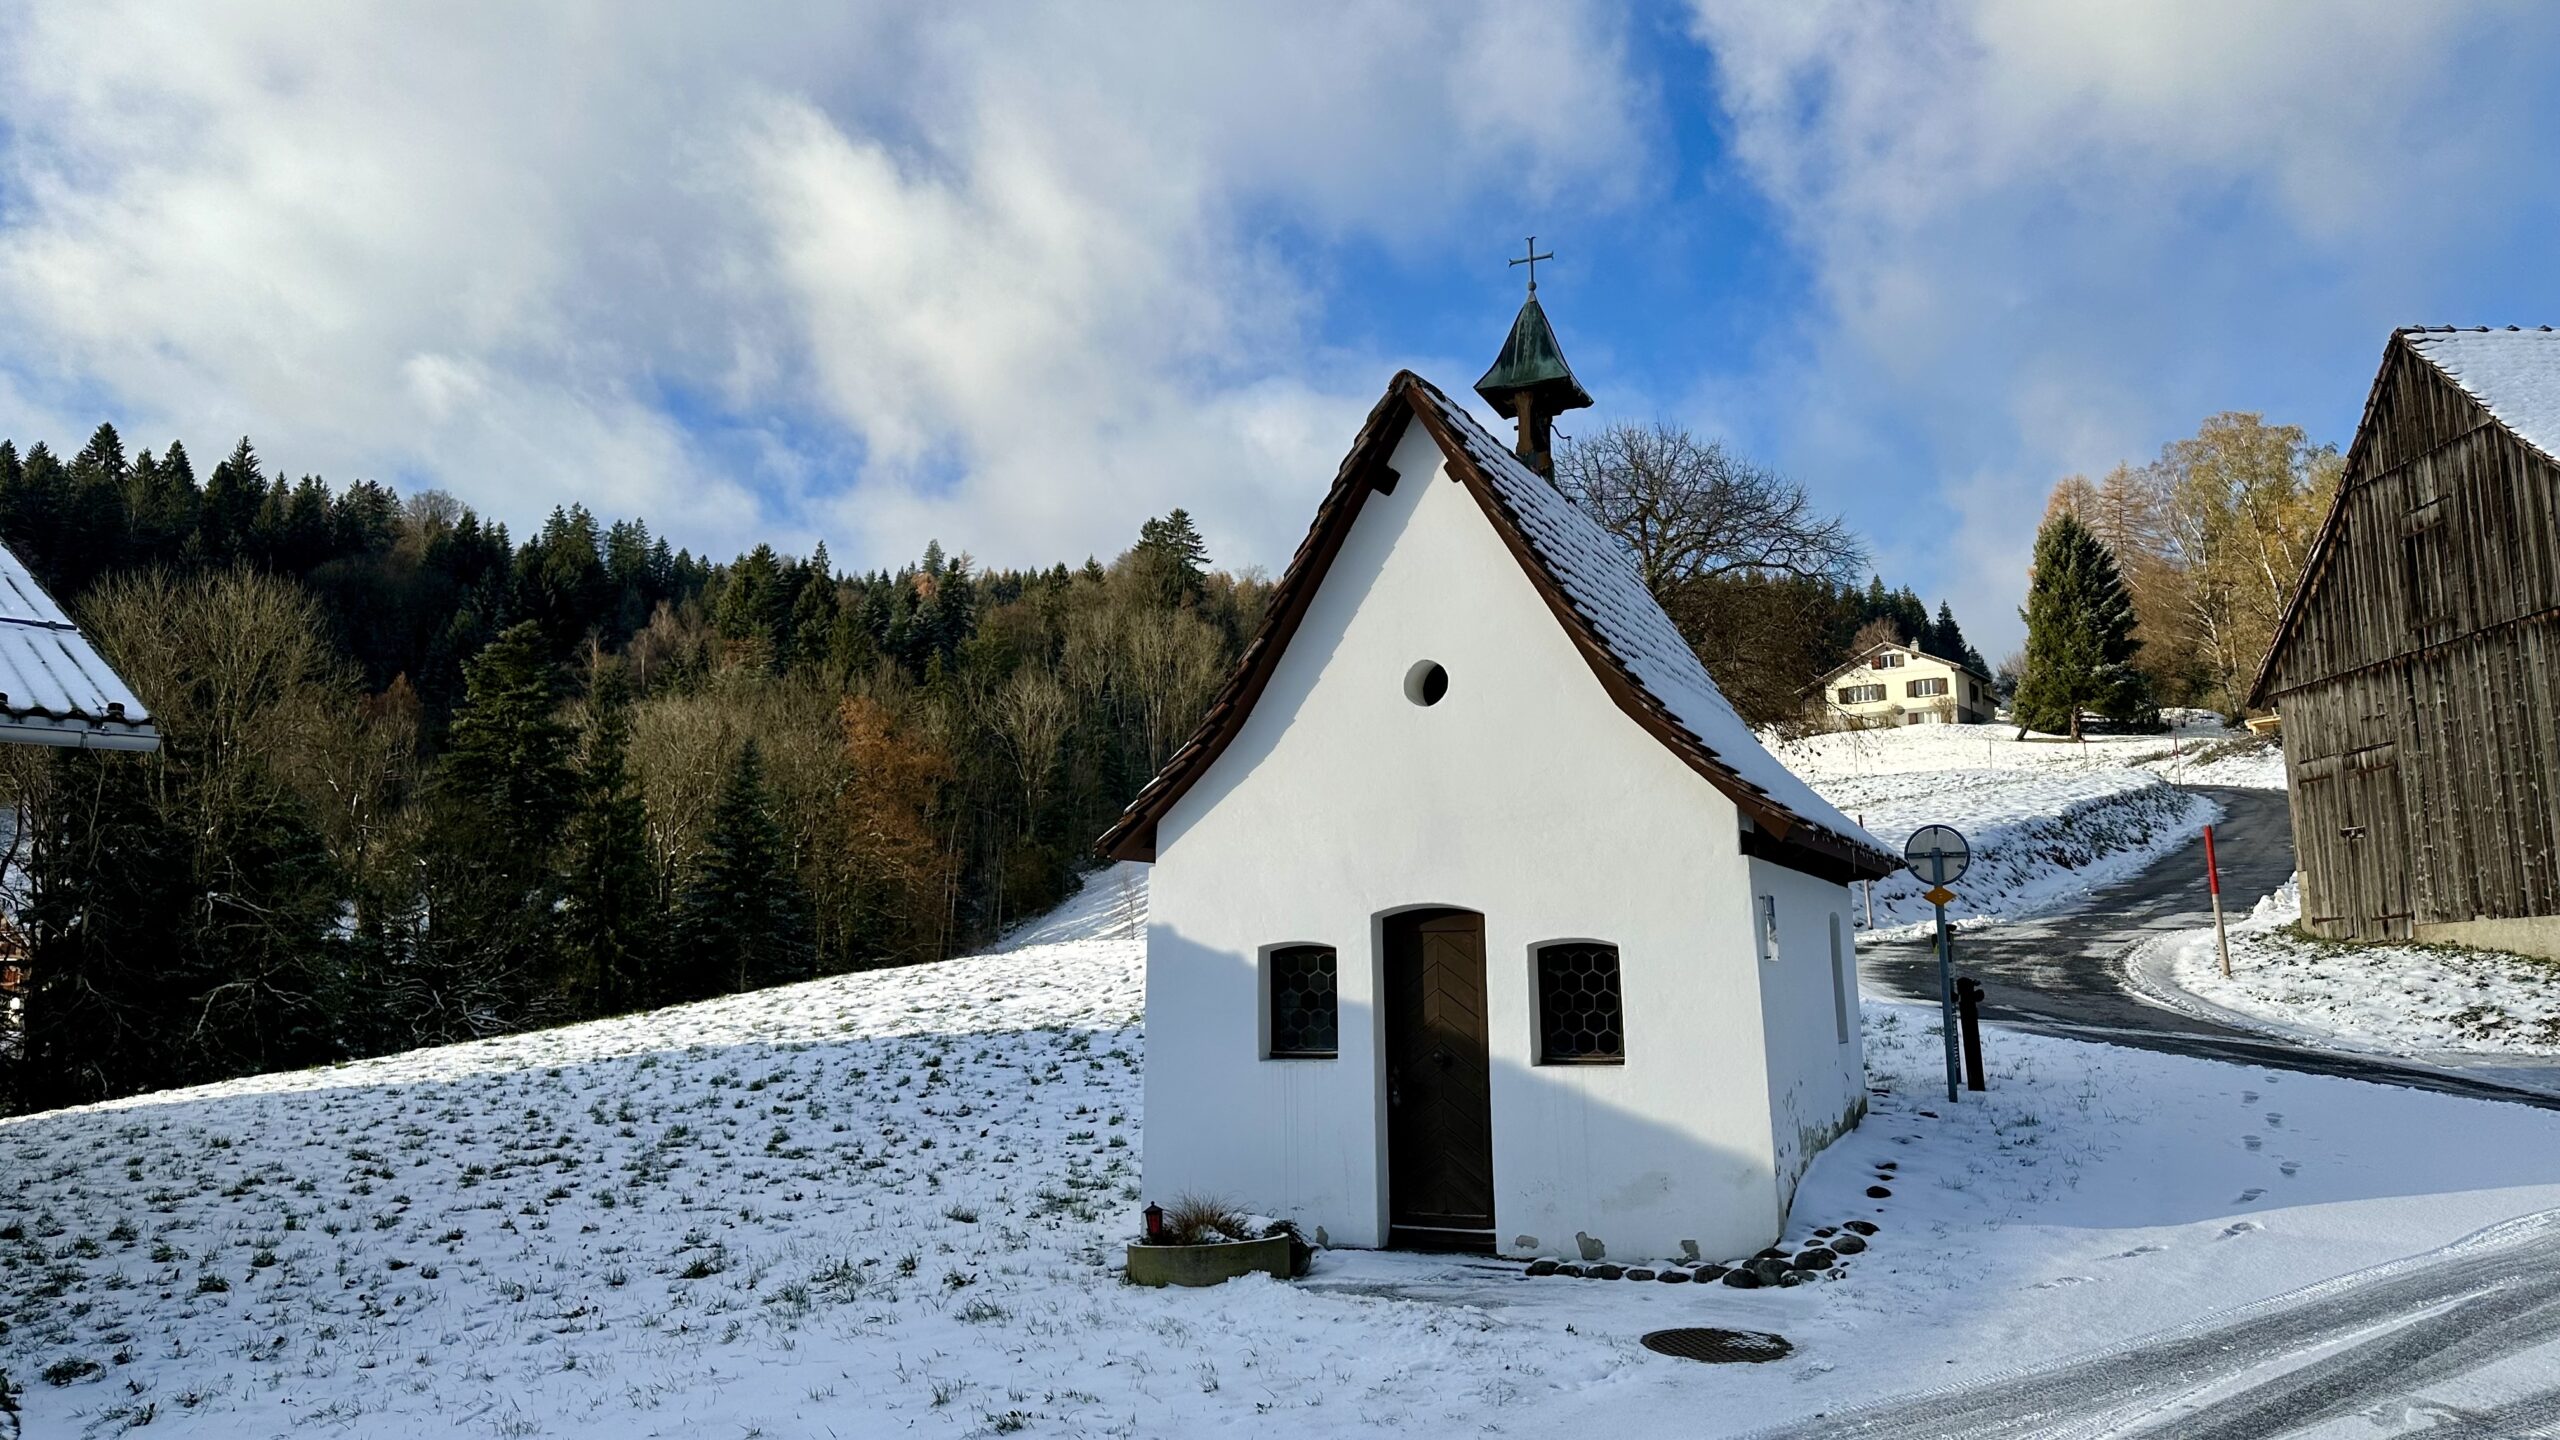 Small white chapel with a steep roof sitting on a snow-covered hillside next to a wooden barn.